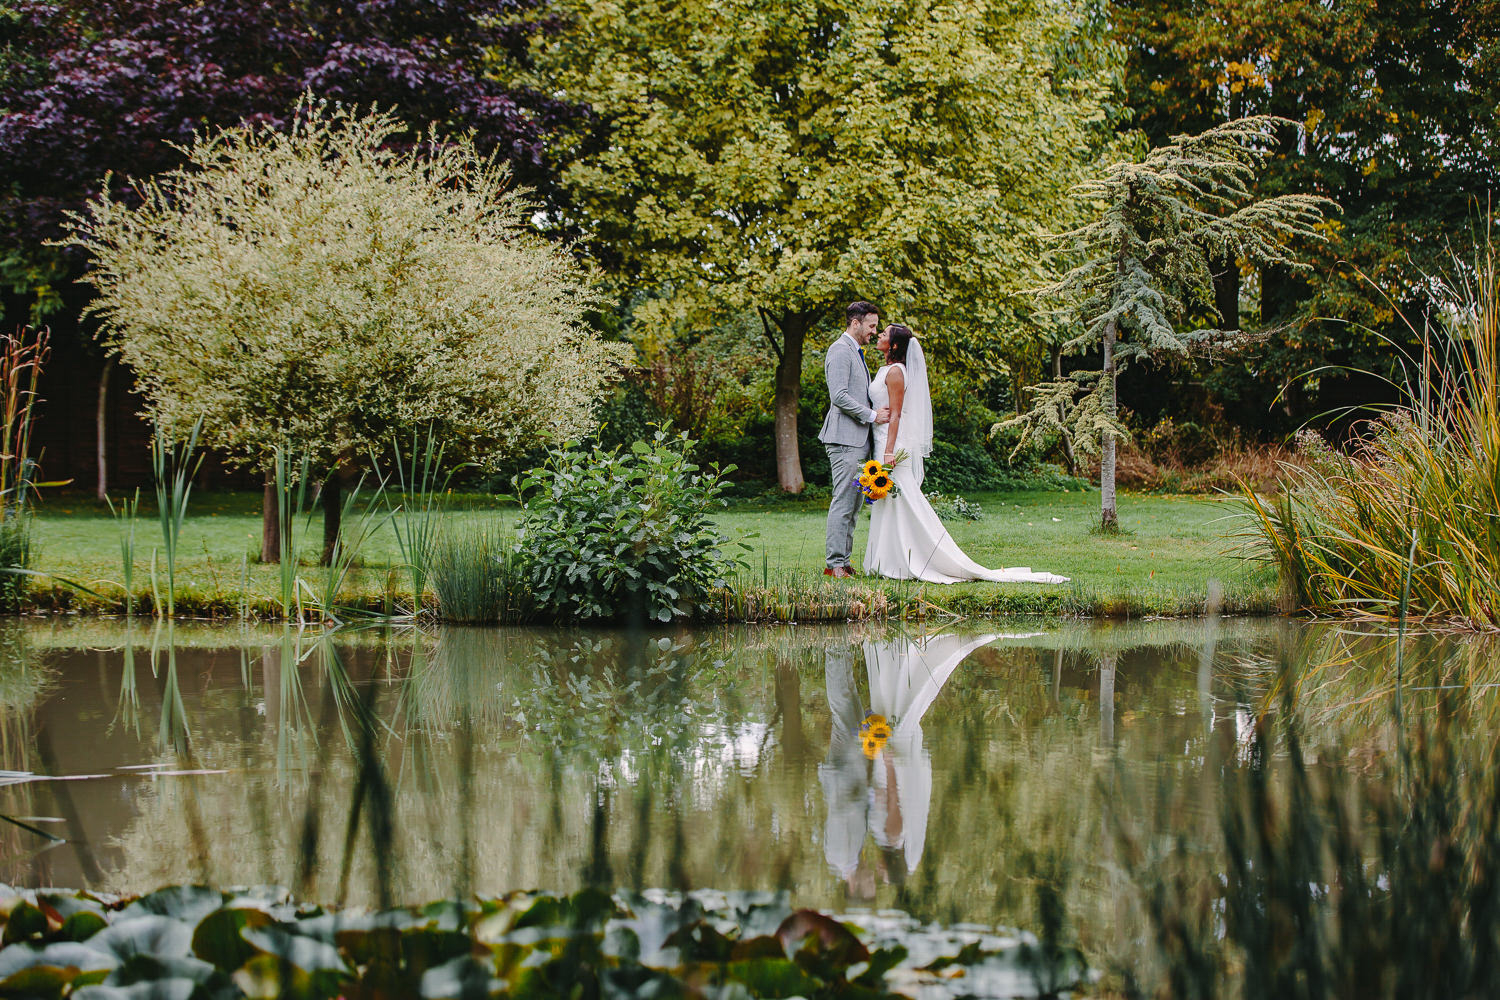 Bride and groom by a lake, reflection in water, grass, trees